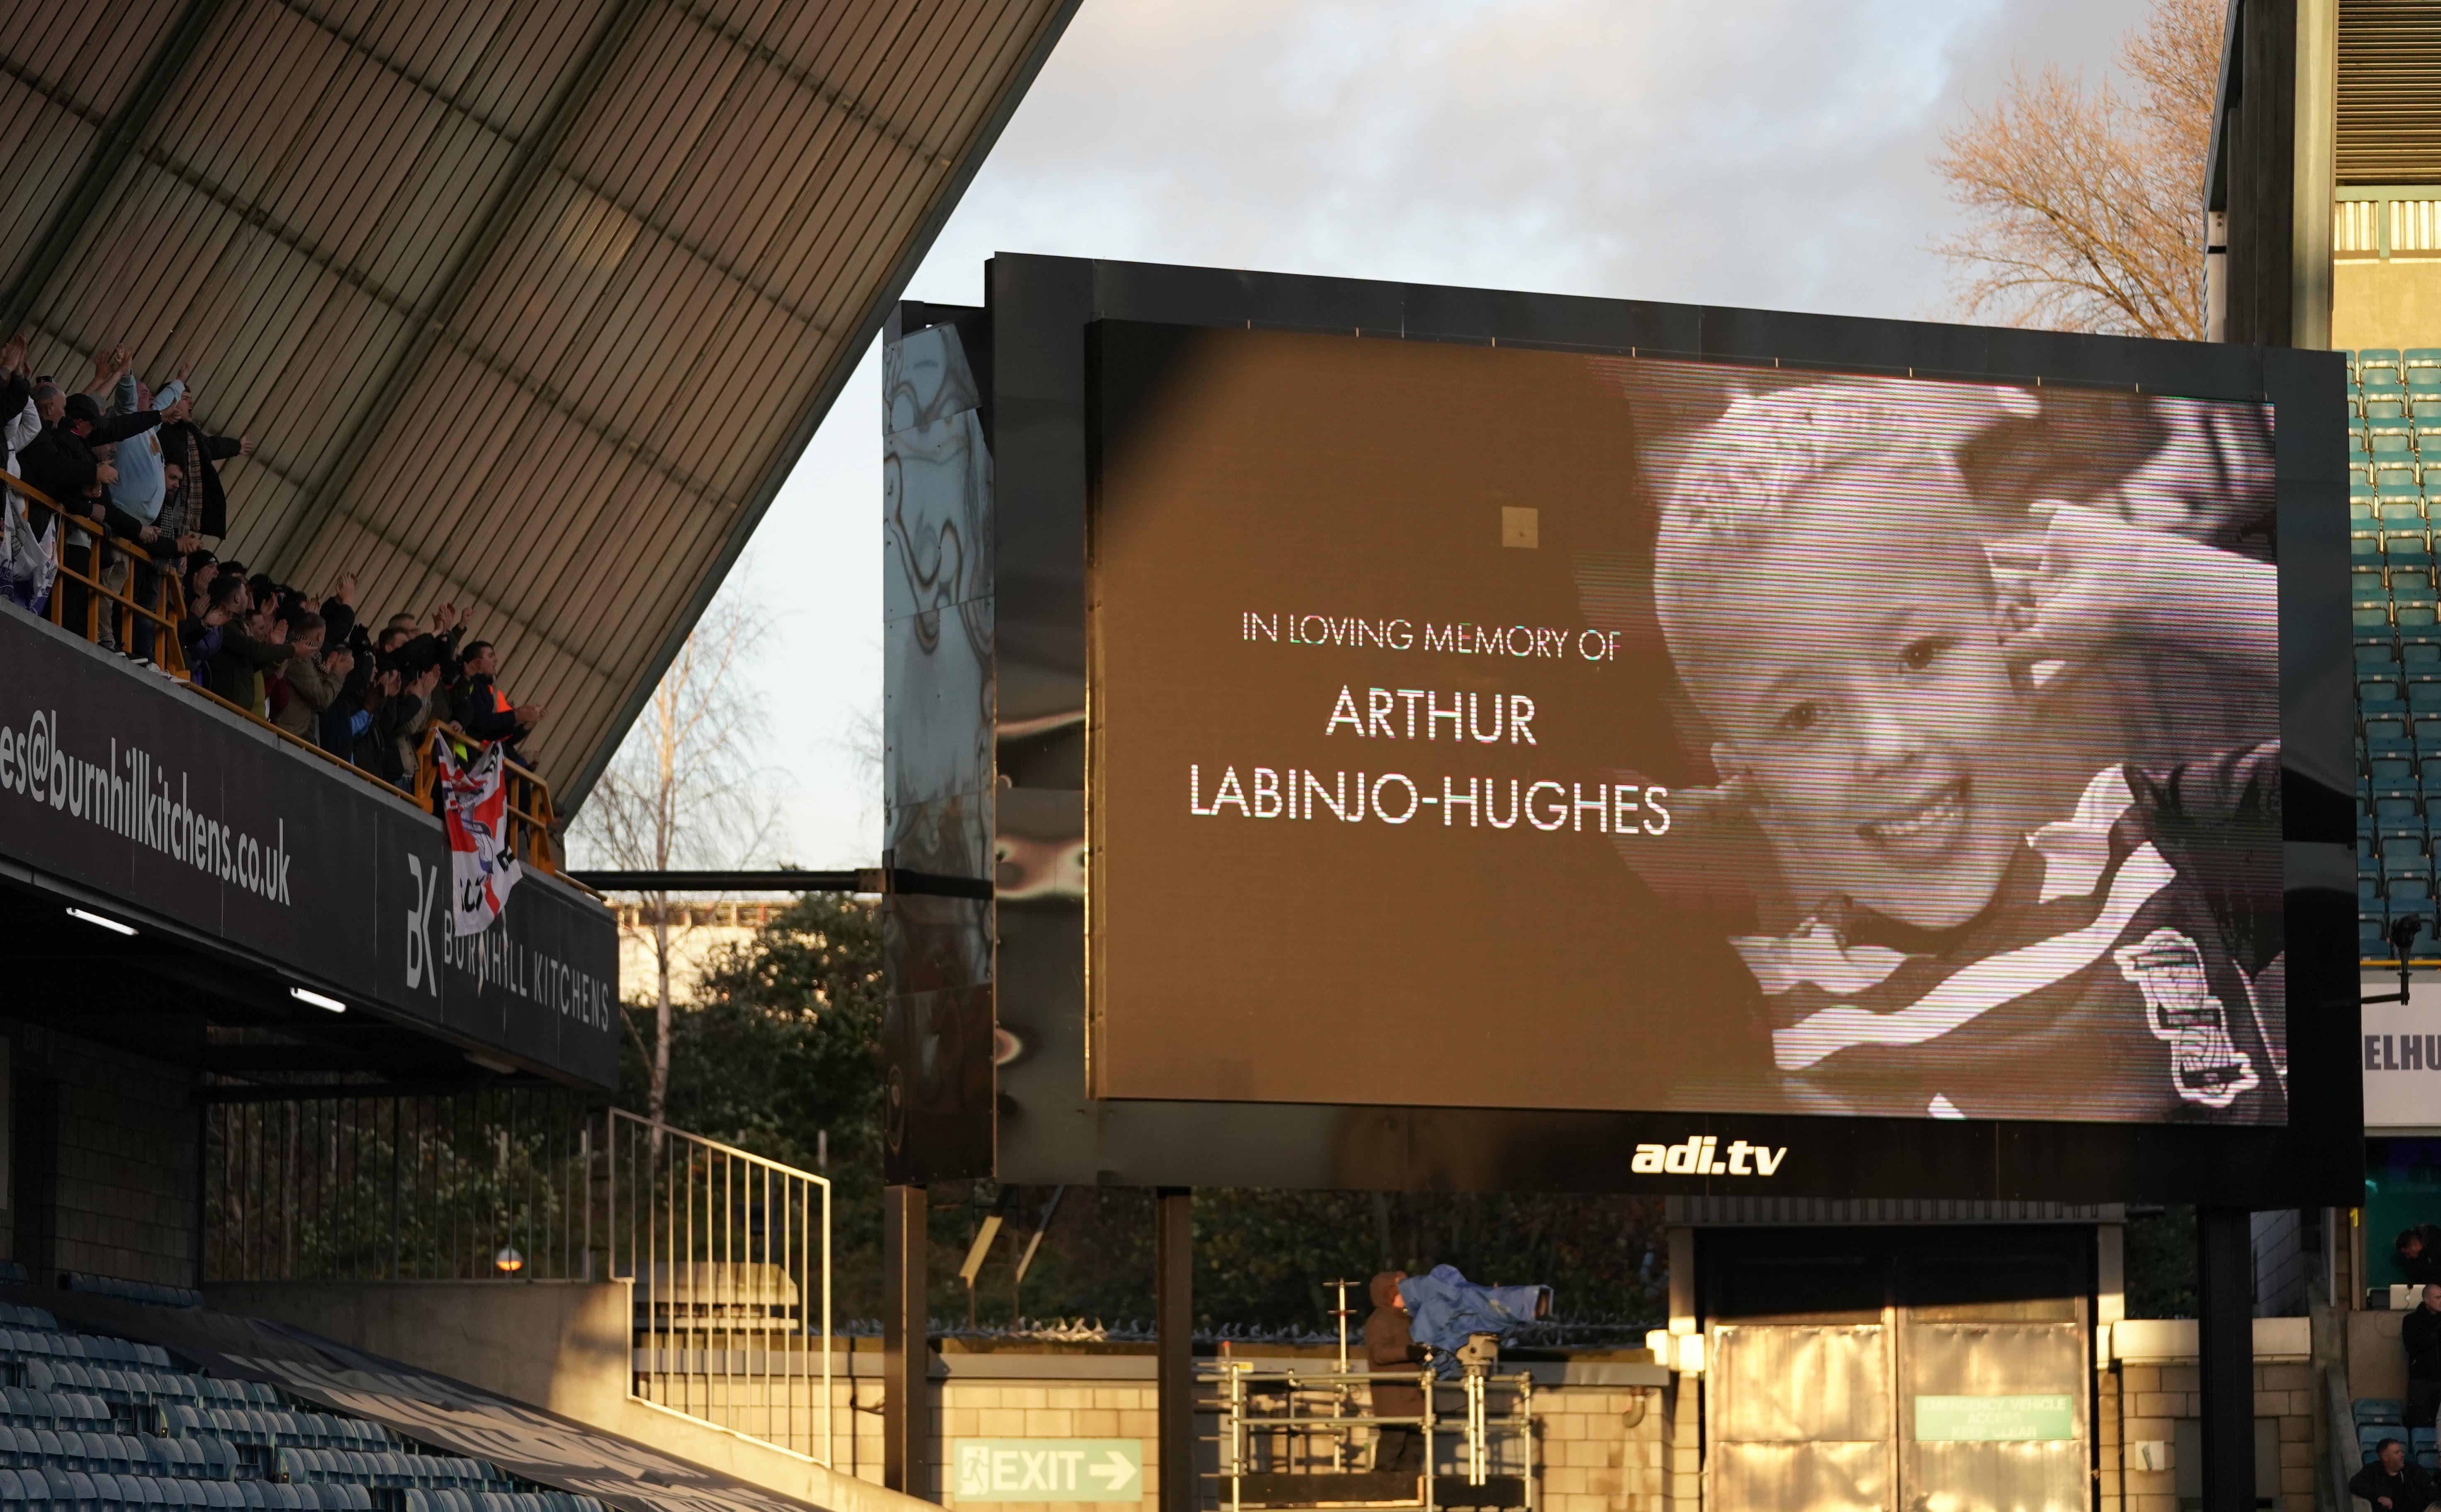 A memorial to Arthur Labinjo-Hughes is shown on the big screen at The Den before the Sky Bet Championship match between Millwall and Birmingham City, who Arthur supported (Kirsty O’Connor/PA)